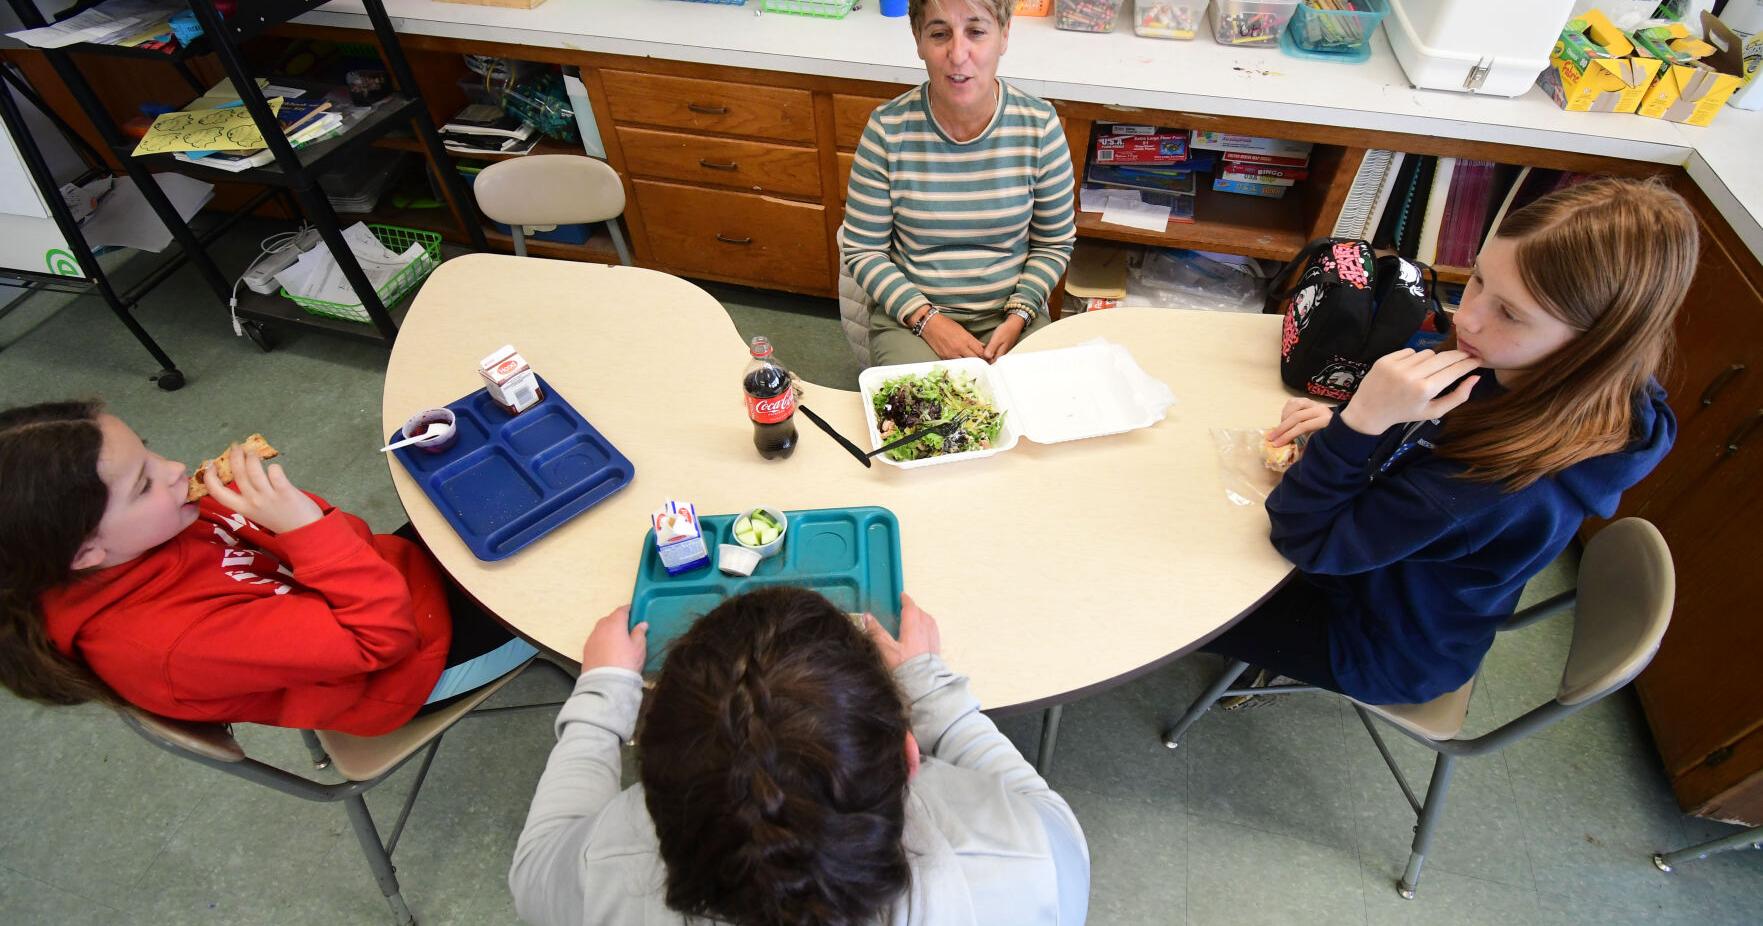 A teacher has lunch with three students